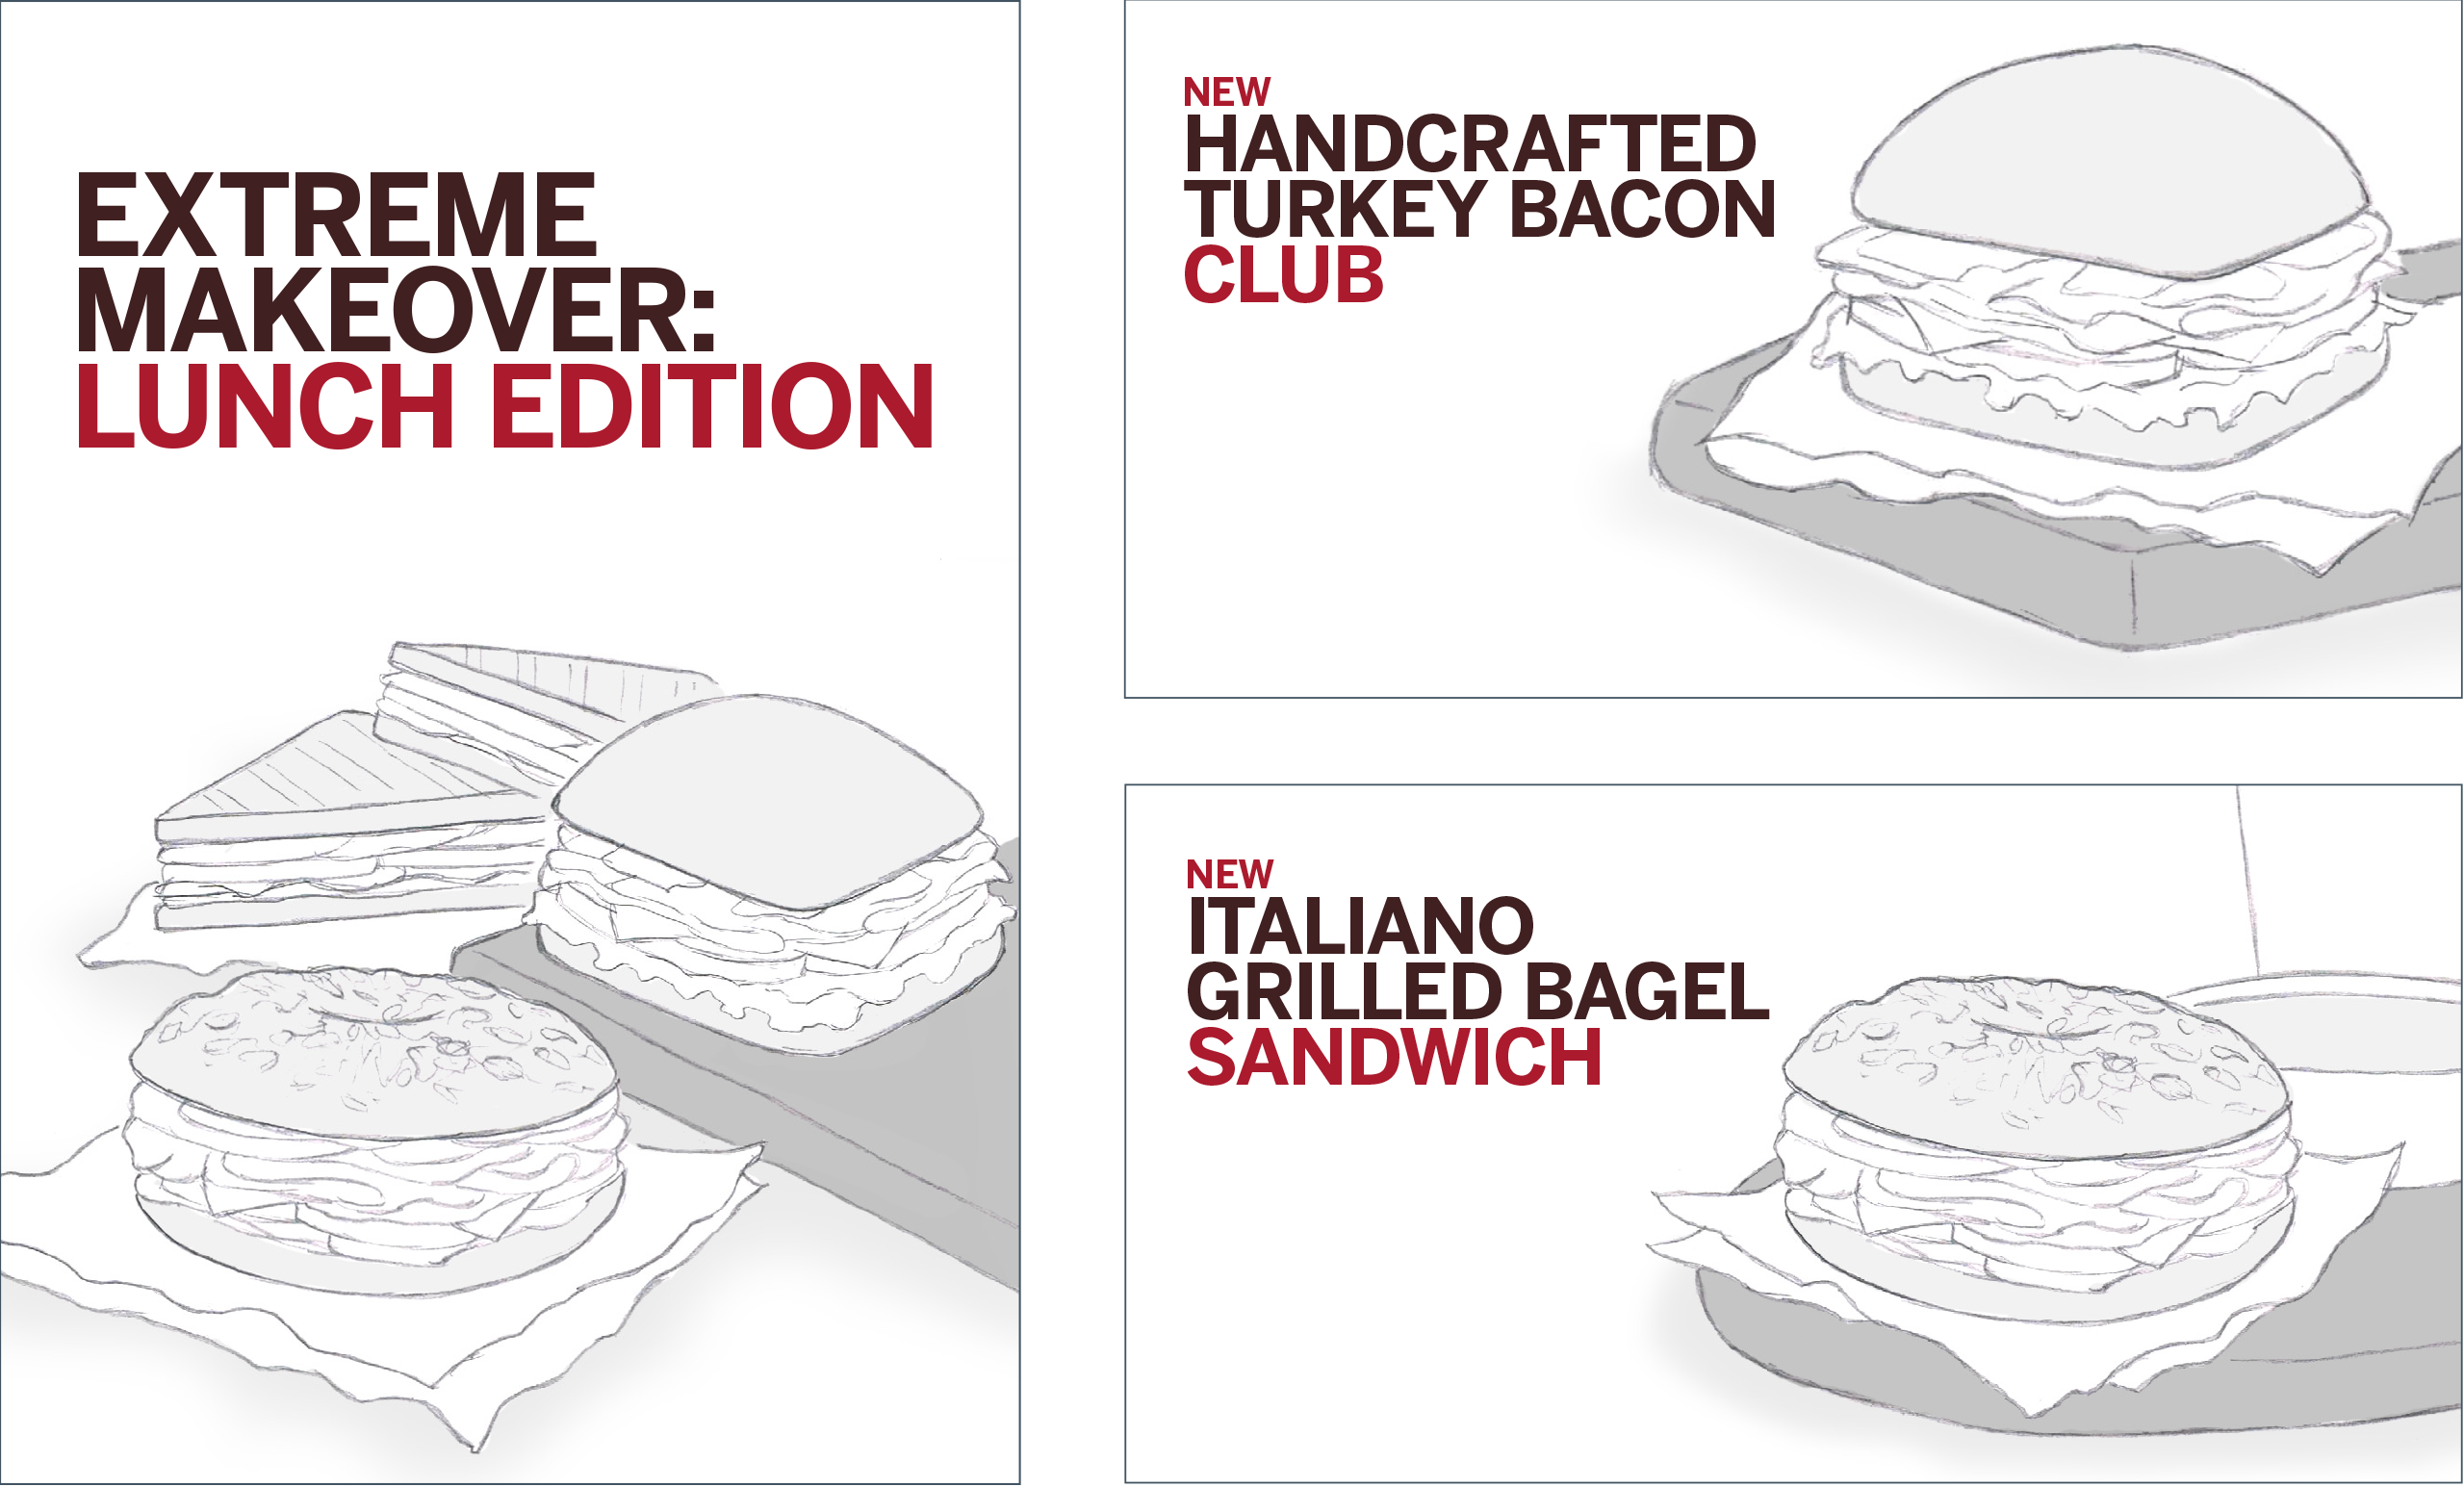 Ad layouts with hand-drawn sketches of sandwiches